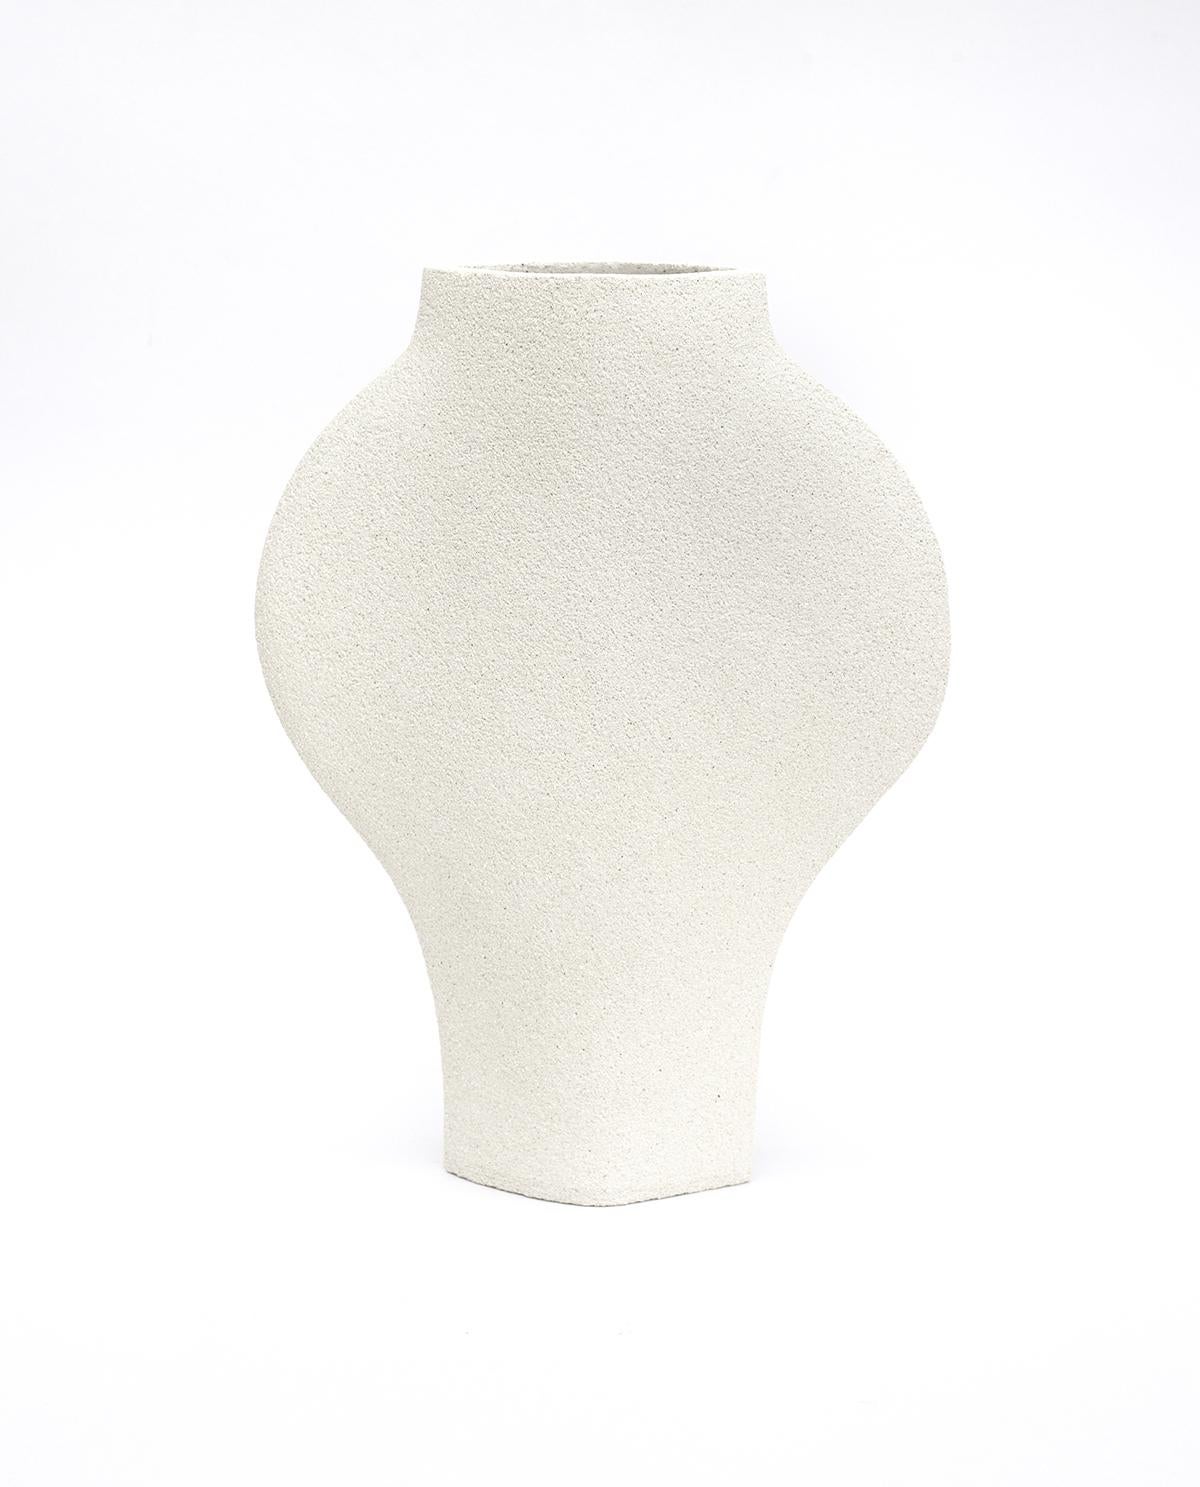 European 21st Century ‘Dal Visage’, in White Ceramic, Hand-Crafted in France For Sale